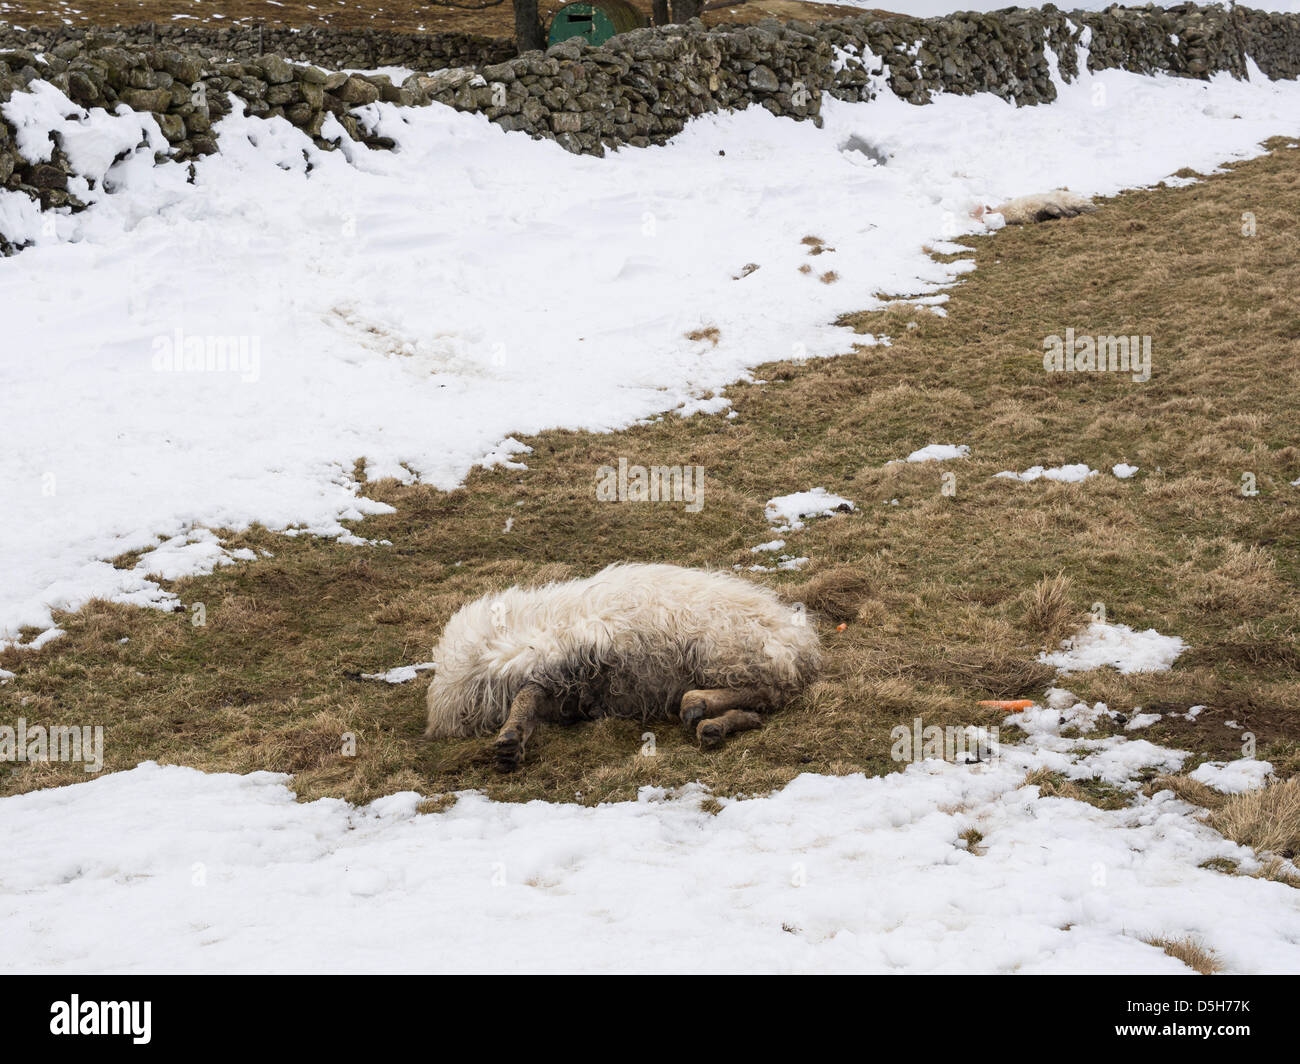 Conwy, North Wales, UK 2nd April 2013. Two dead sheep lie by a snow hole after being buried in a snow drift where they sheltered in the hills of Snowdonia when heavy snowfall hit the region.  During the coldest March in the UK since 1962 heavy snow fell in the mountains of North Wales and many hillfarmers lost sheep in the sudden severe weather. Farmers on remote farms now face the problem of disposing of the bodies. Stock Photo